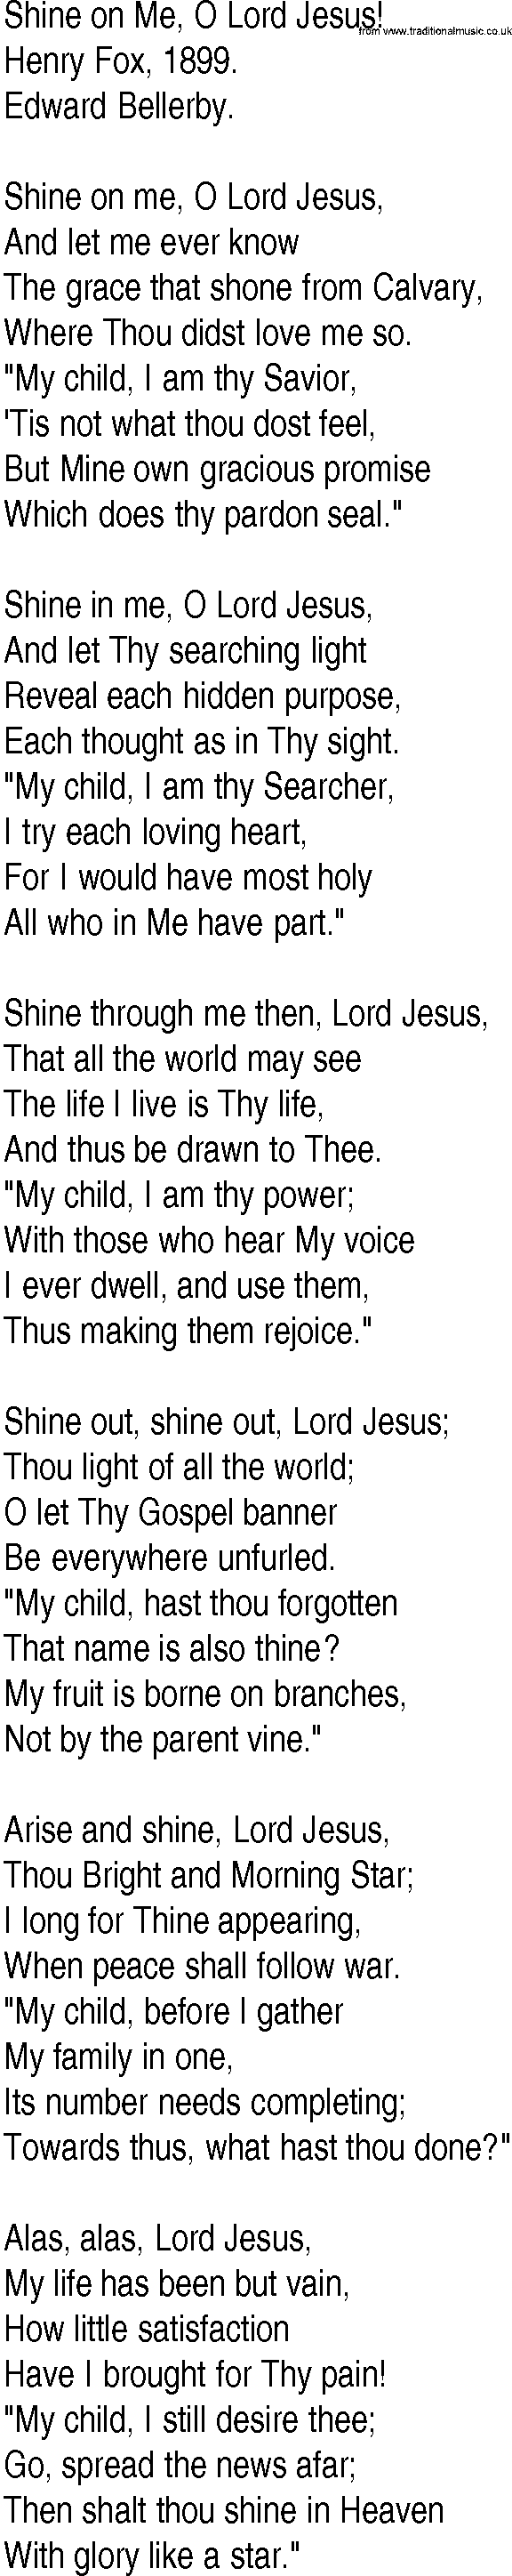 Hymn and Gospel Song: Shine on Me, O Lord Jesus! by Henry Fox lyrics